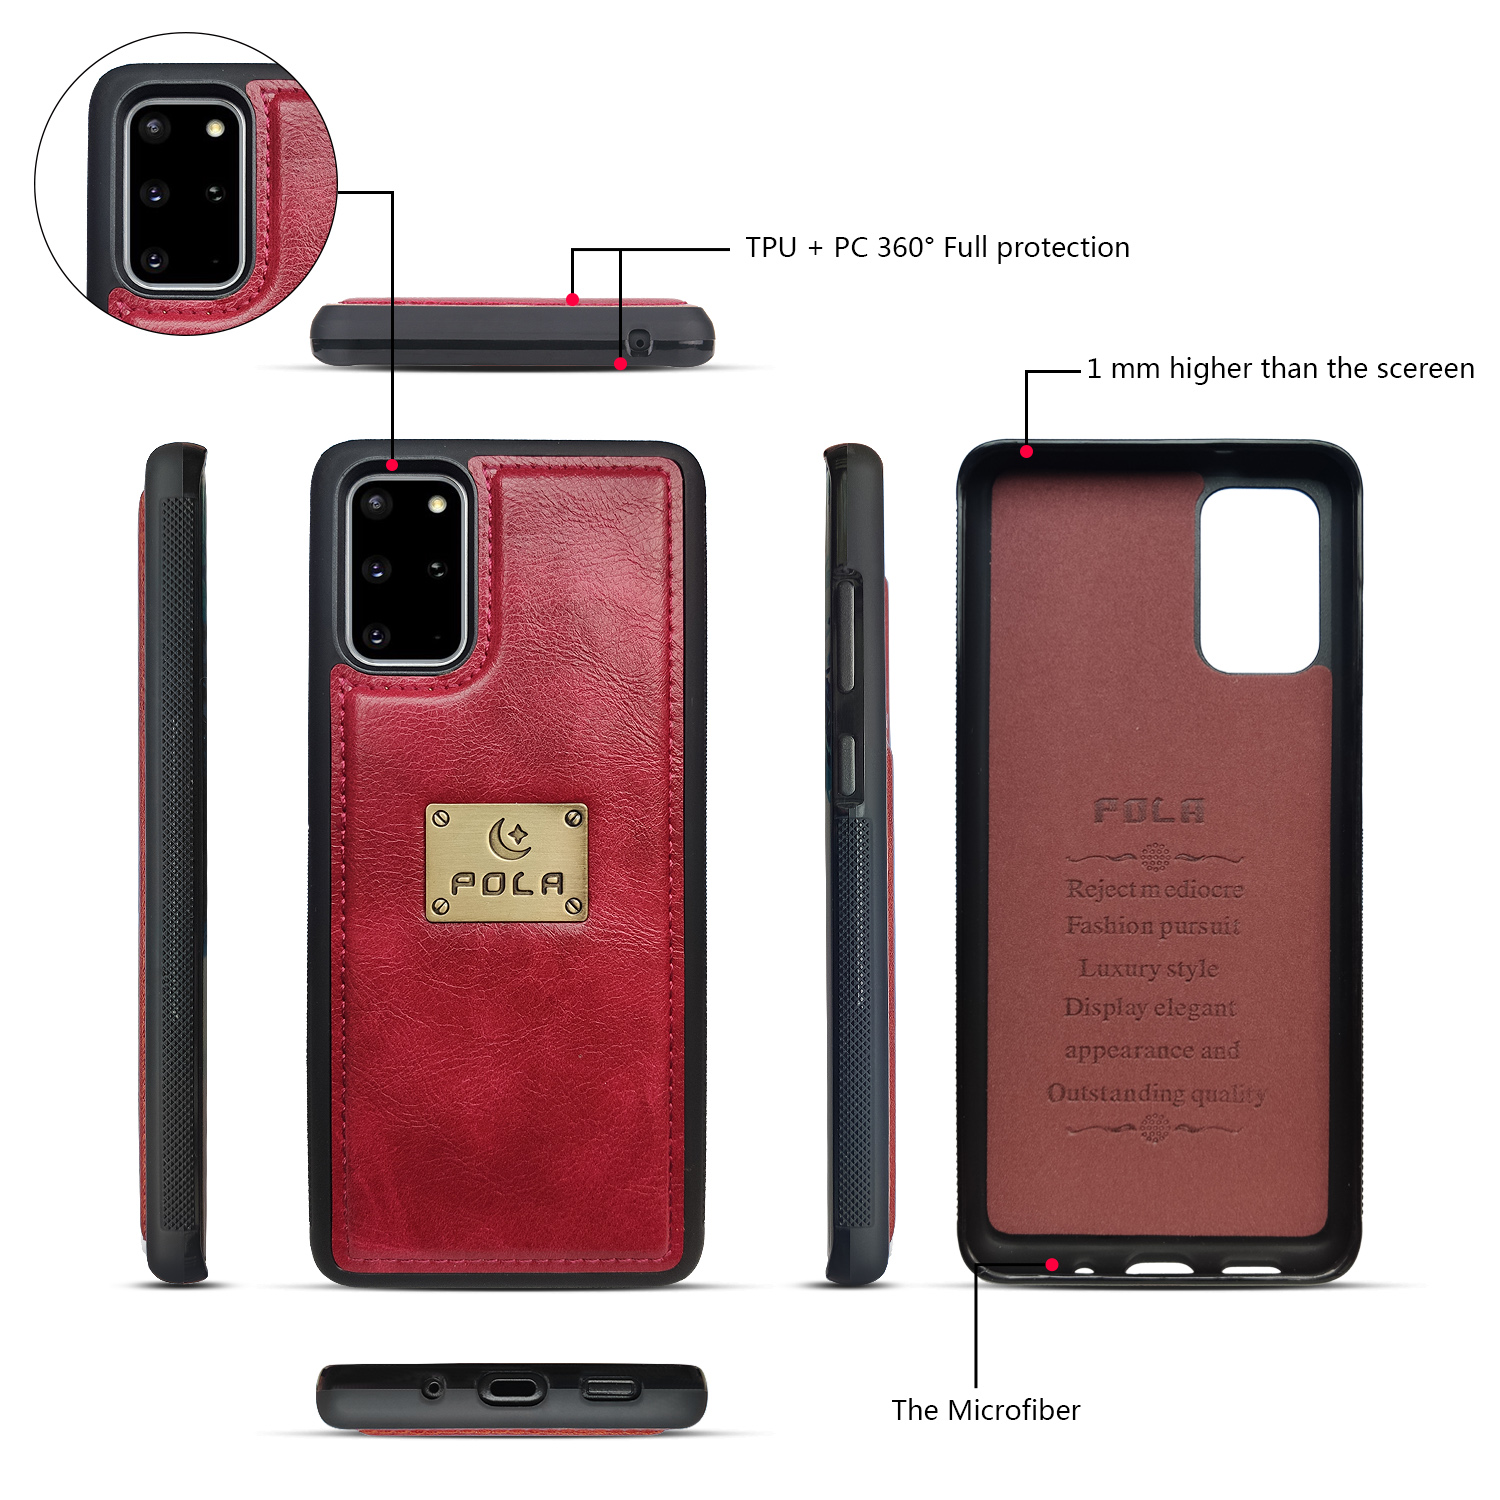 Galaxy S20+ Plus Case, Allytech Retro PU Leather Magnetic Detachable Back Cover Zipper Wallet Folio Multiple Cards Slots Purse Wrist Strap Clutch Protective Case for Samsung Galaxy S20 Plus,Red - image 4 of 9